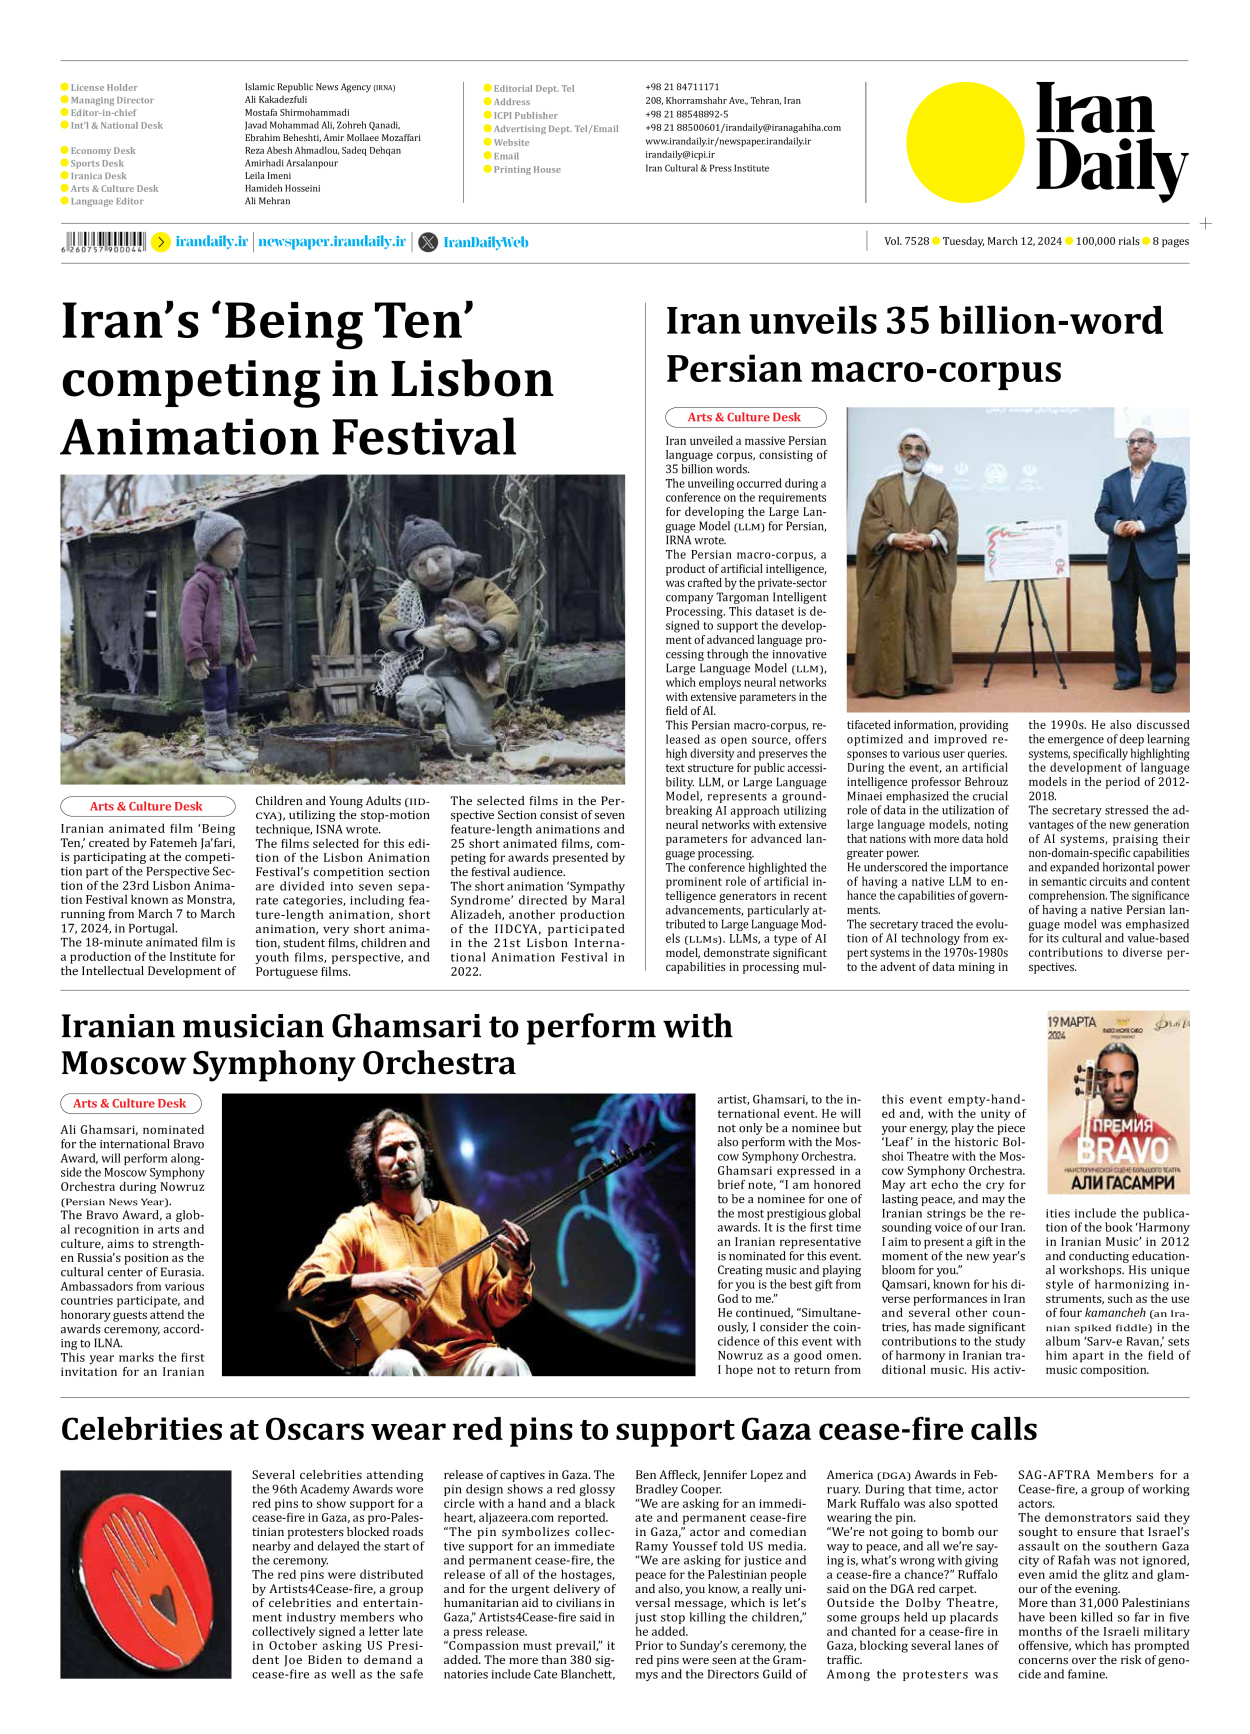 Iran Daily - Number Seven Thousand Five Hundred and Twenty Eight - 12 March 2024 - Page 8